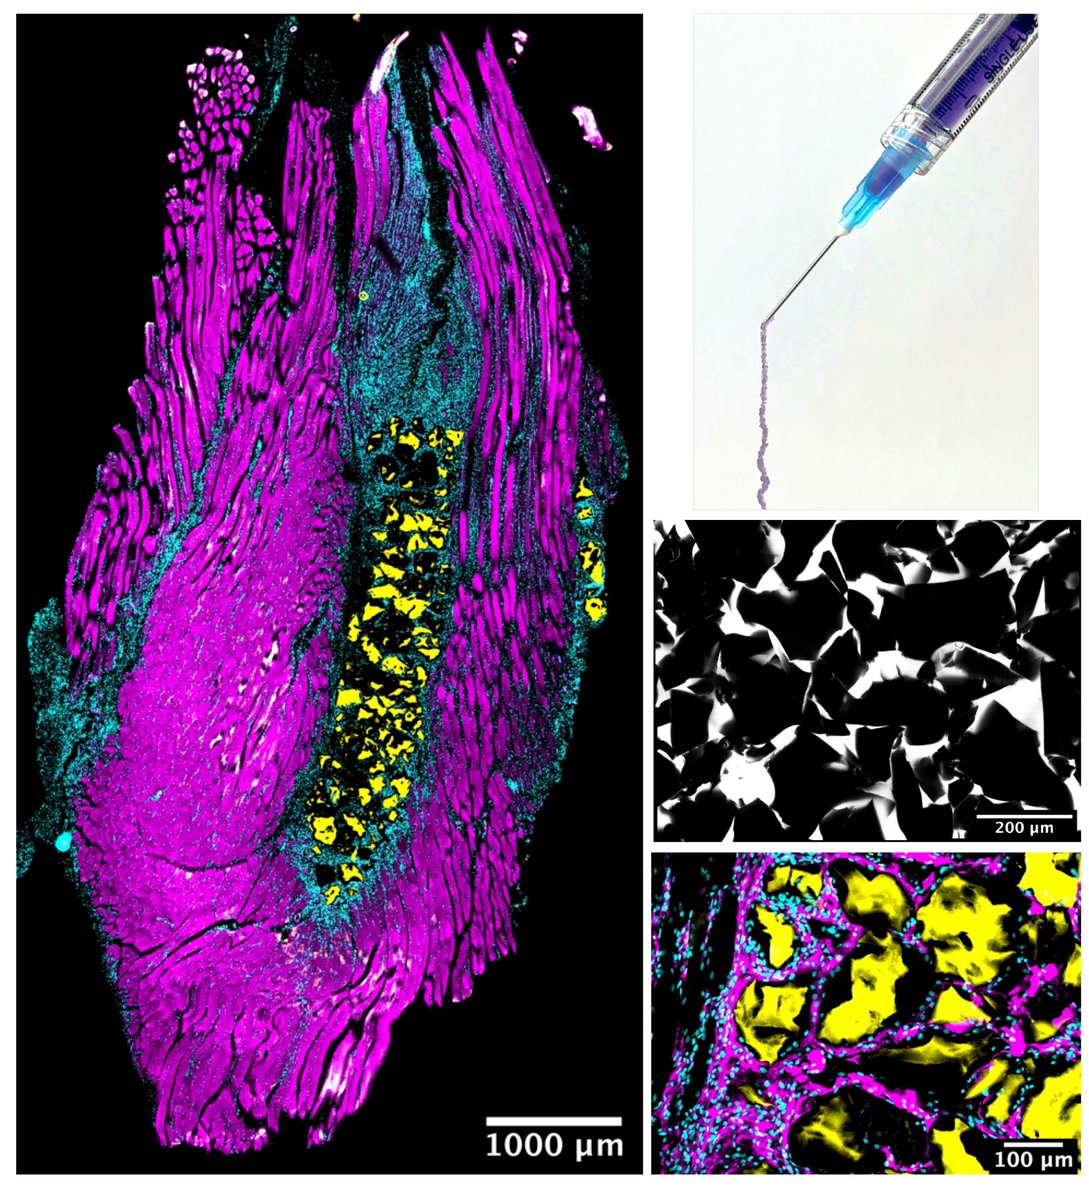 Excited to share the lab's 1st research ppr published in @AdvSciNews Advanced Healthcare Materials. Super work from undergrads @ellietanner614 Leia Schiltz & Niharika Narra, showing granular hydrogels support myogenic repair after volumetric muscle injury @PurdueBME @MYOTWlTTER